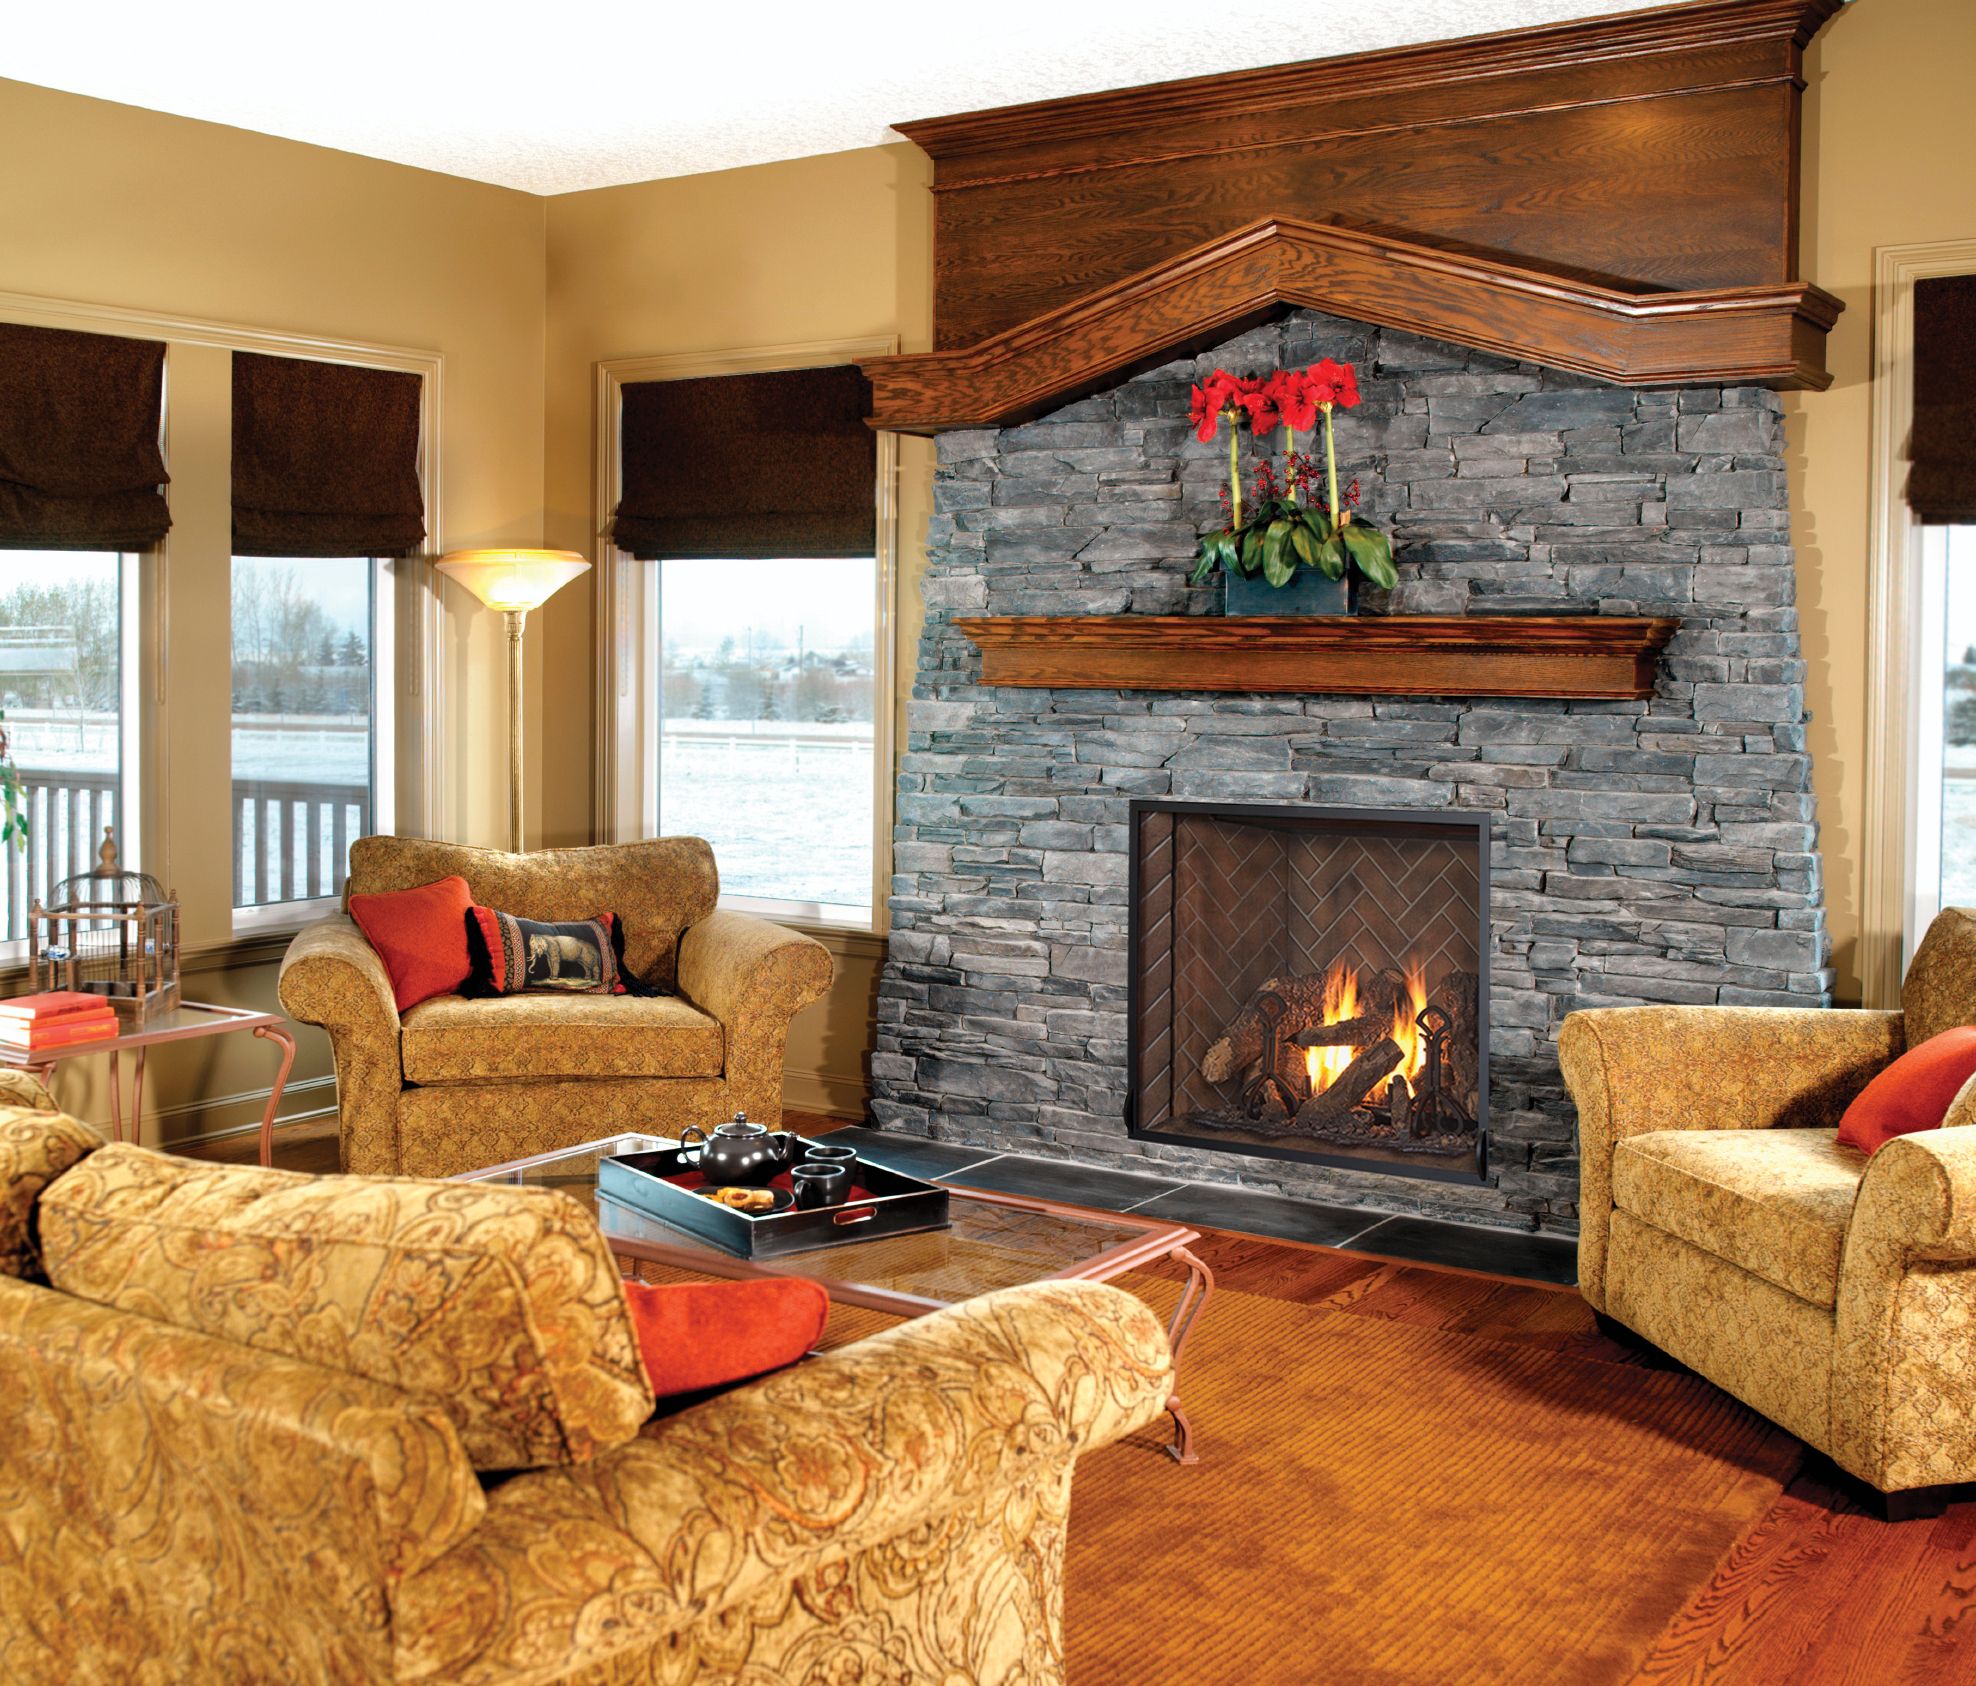 How a Fireplace Enhances the Look of a Room